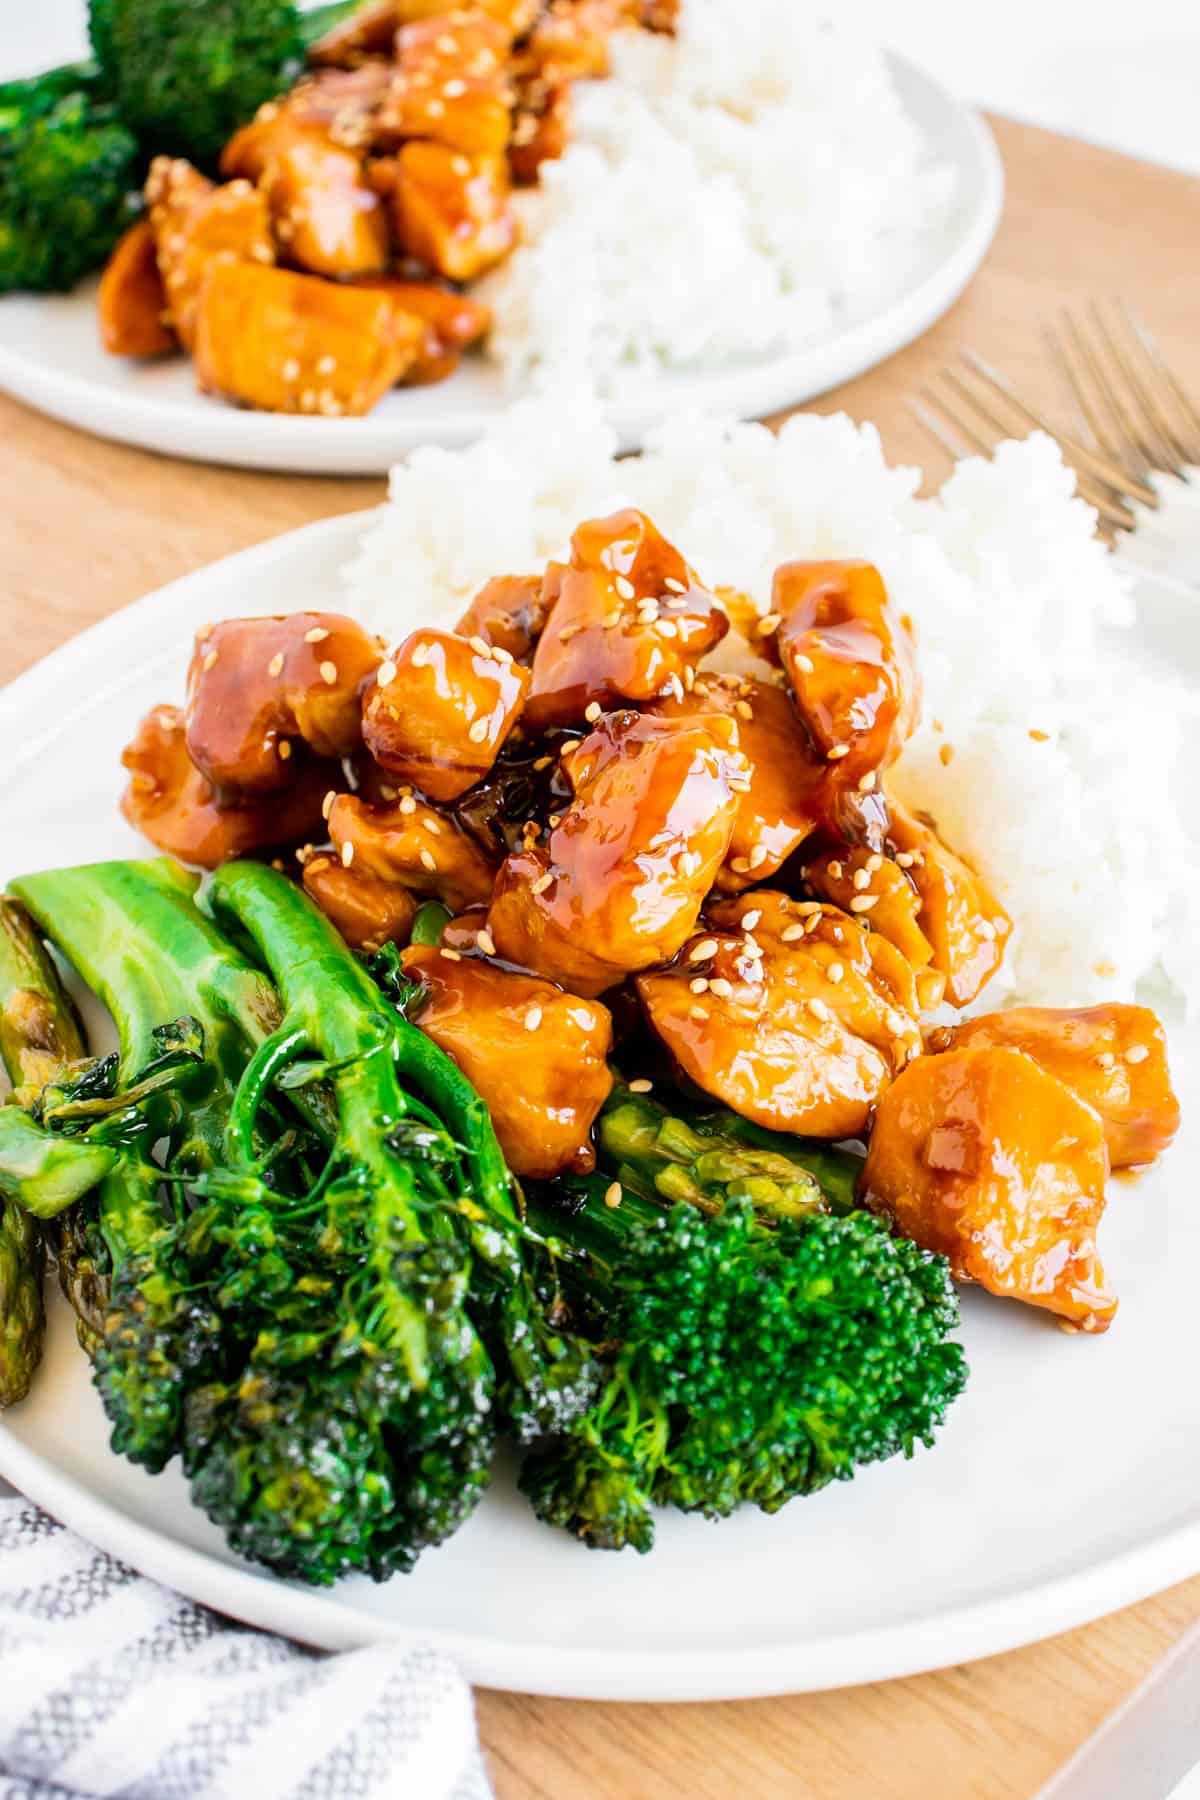 Honey garlic chicken on a plate with rice and broccolini.